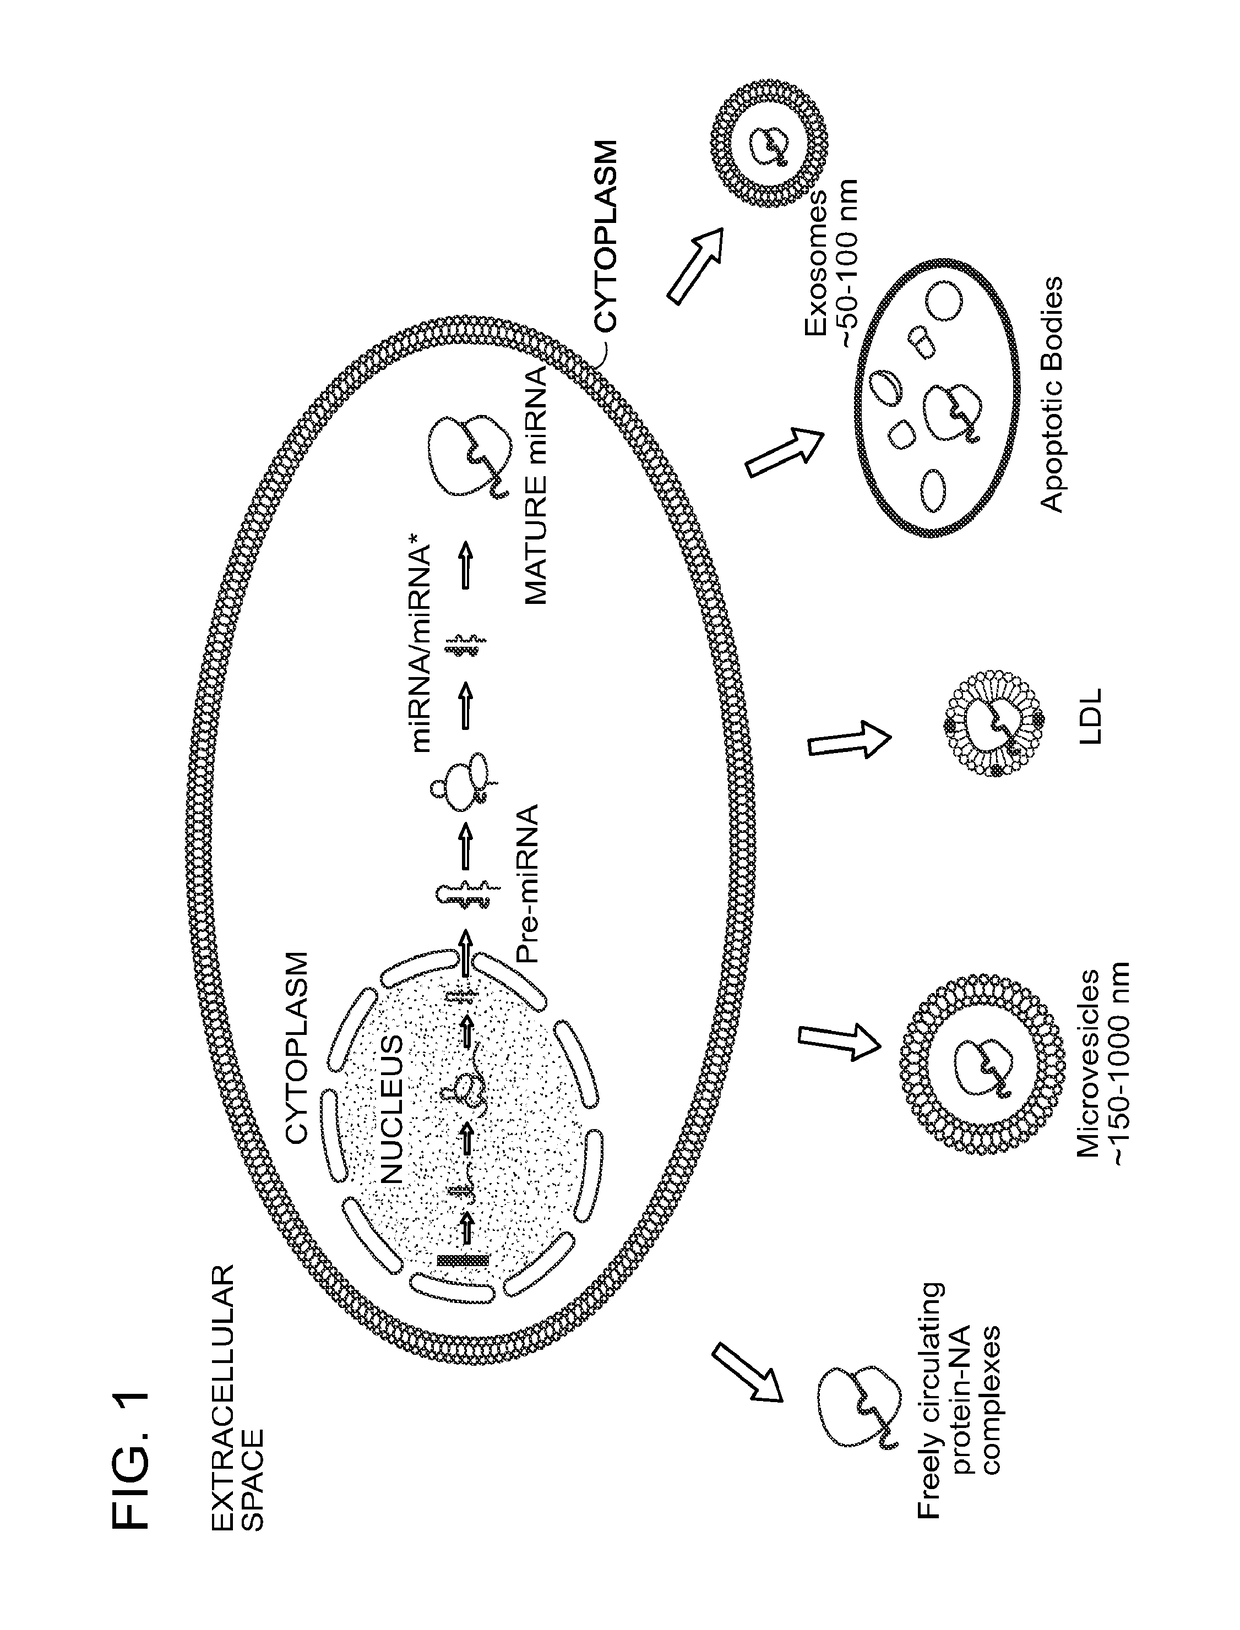 Methods for the isolation of extracellular vesicles and other bioparticles from urine and other biofluids